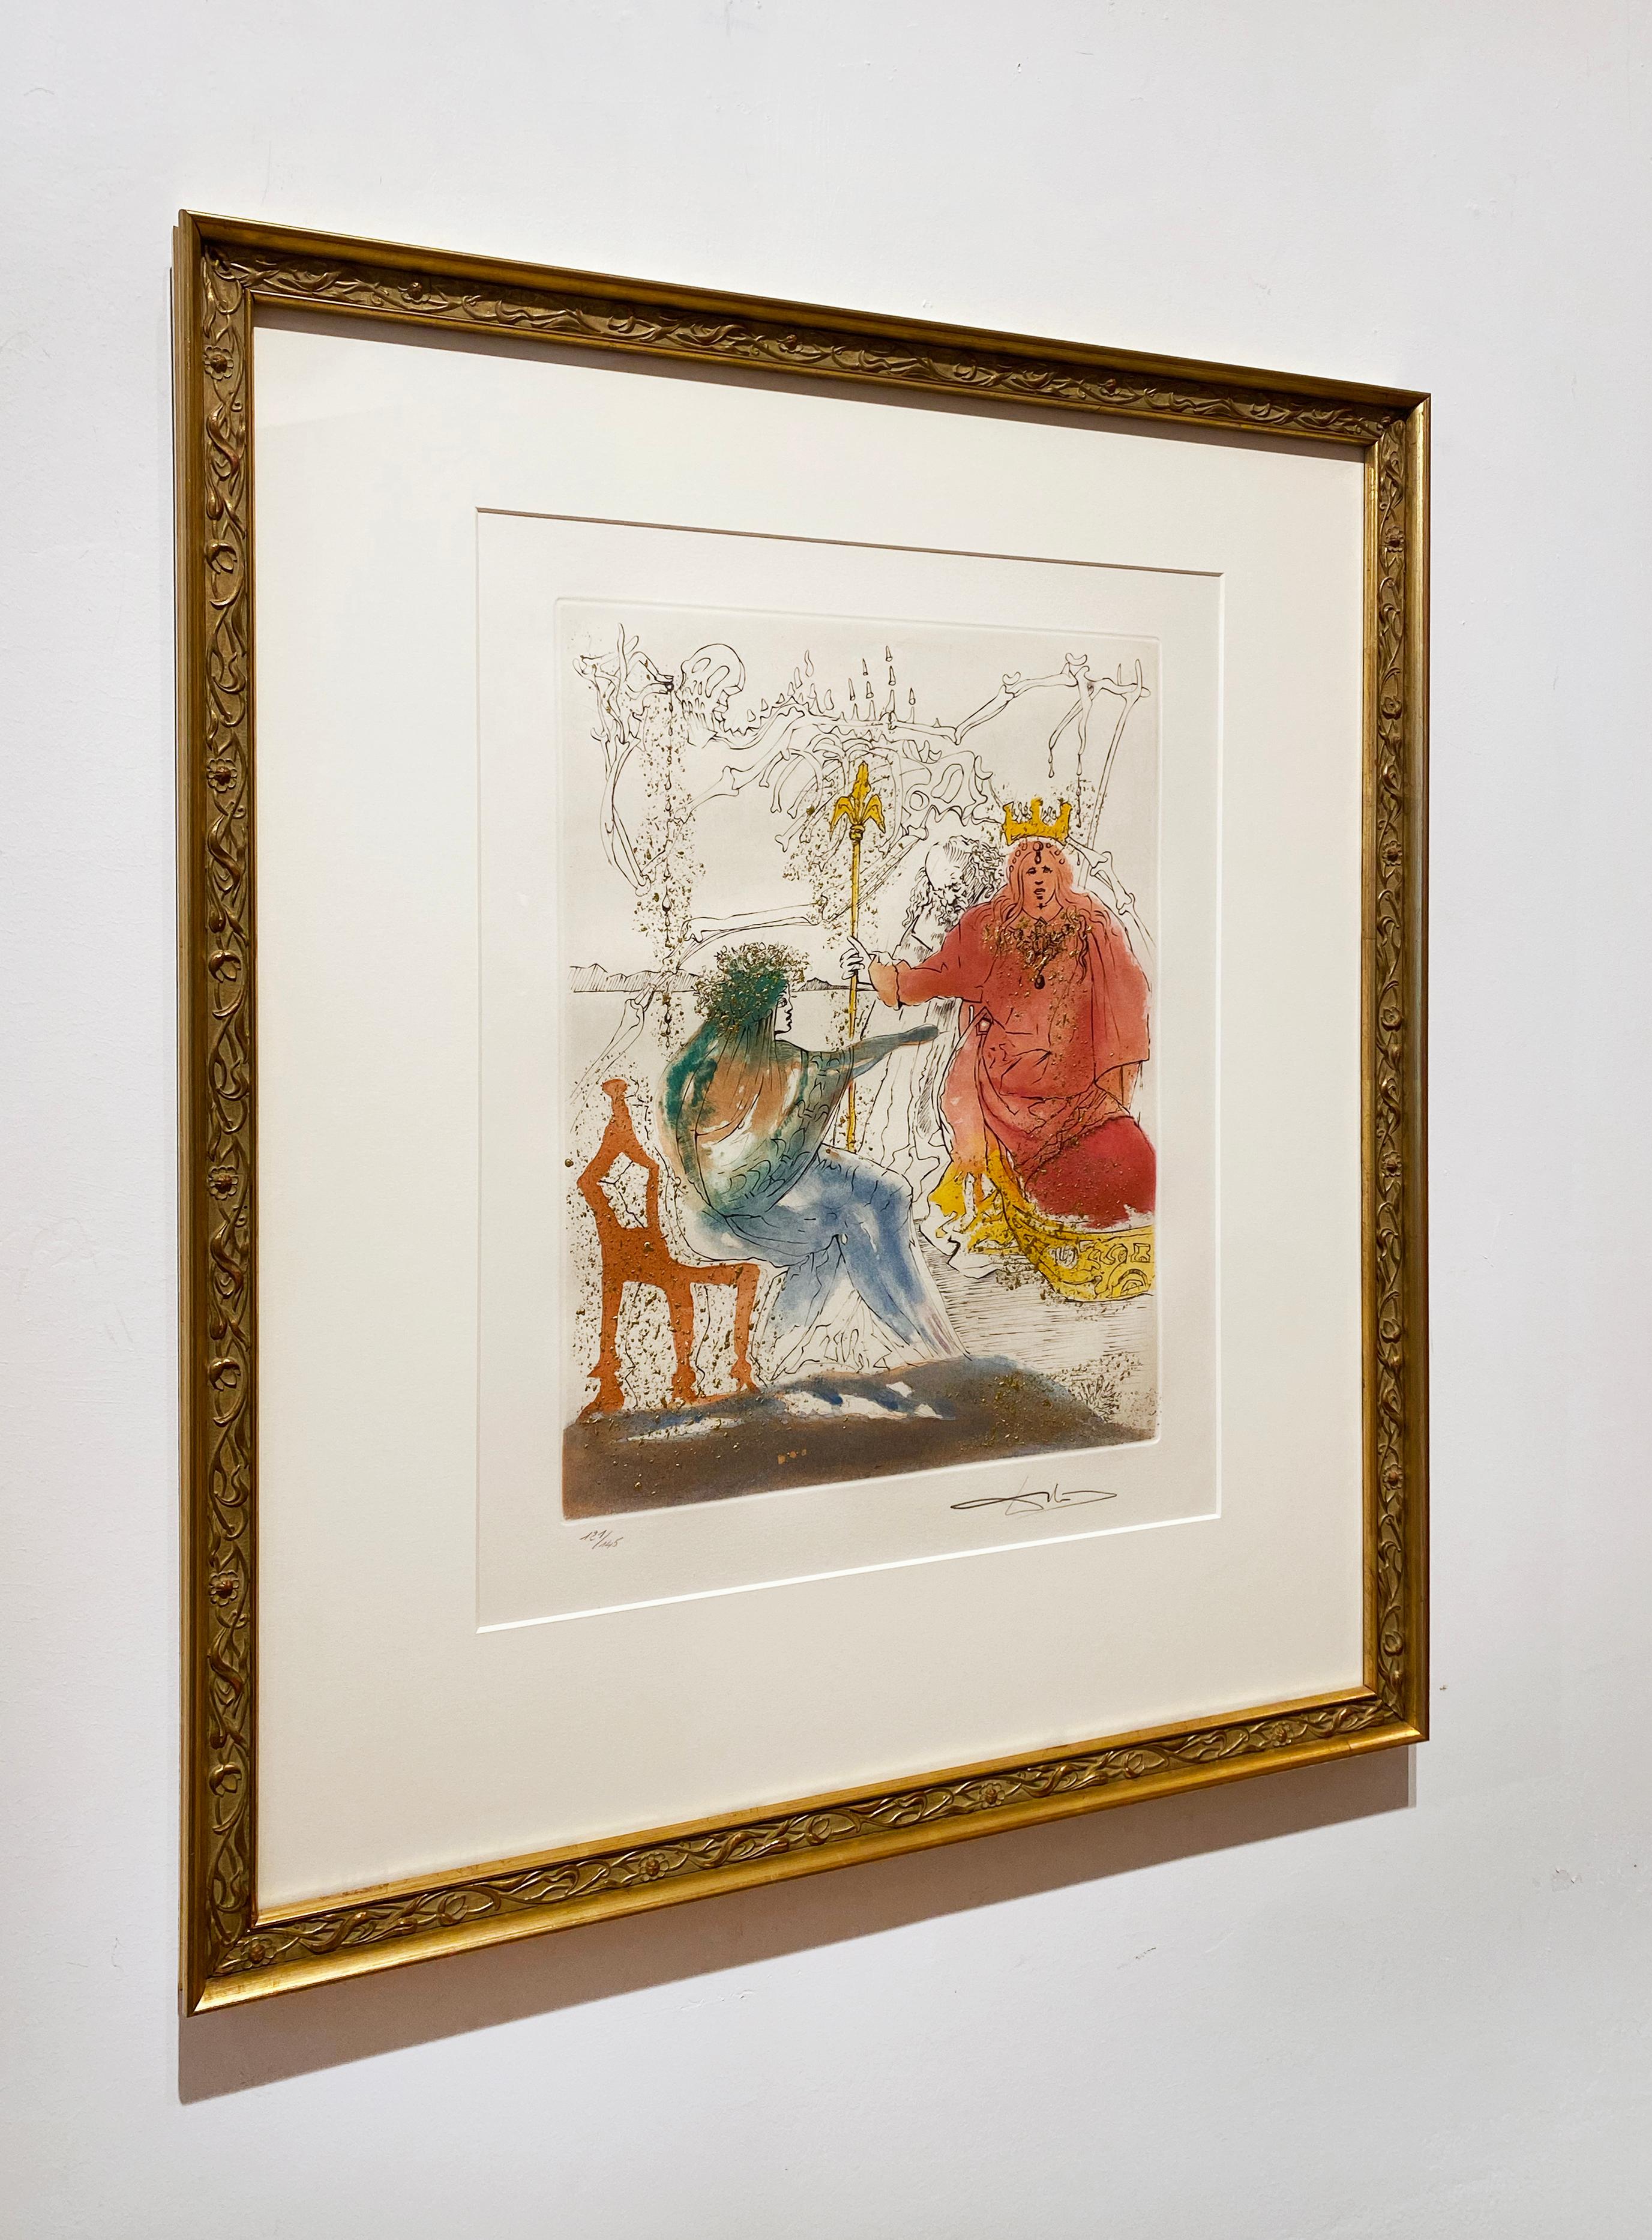 Artist:  Dali, Salvador
Title:  The King Is Told of Hamlet’s Story
Series:  Hamlet
Date:  1973
Medium:  Lithograph on Arches
Unframed Dimensions:  15